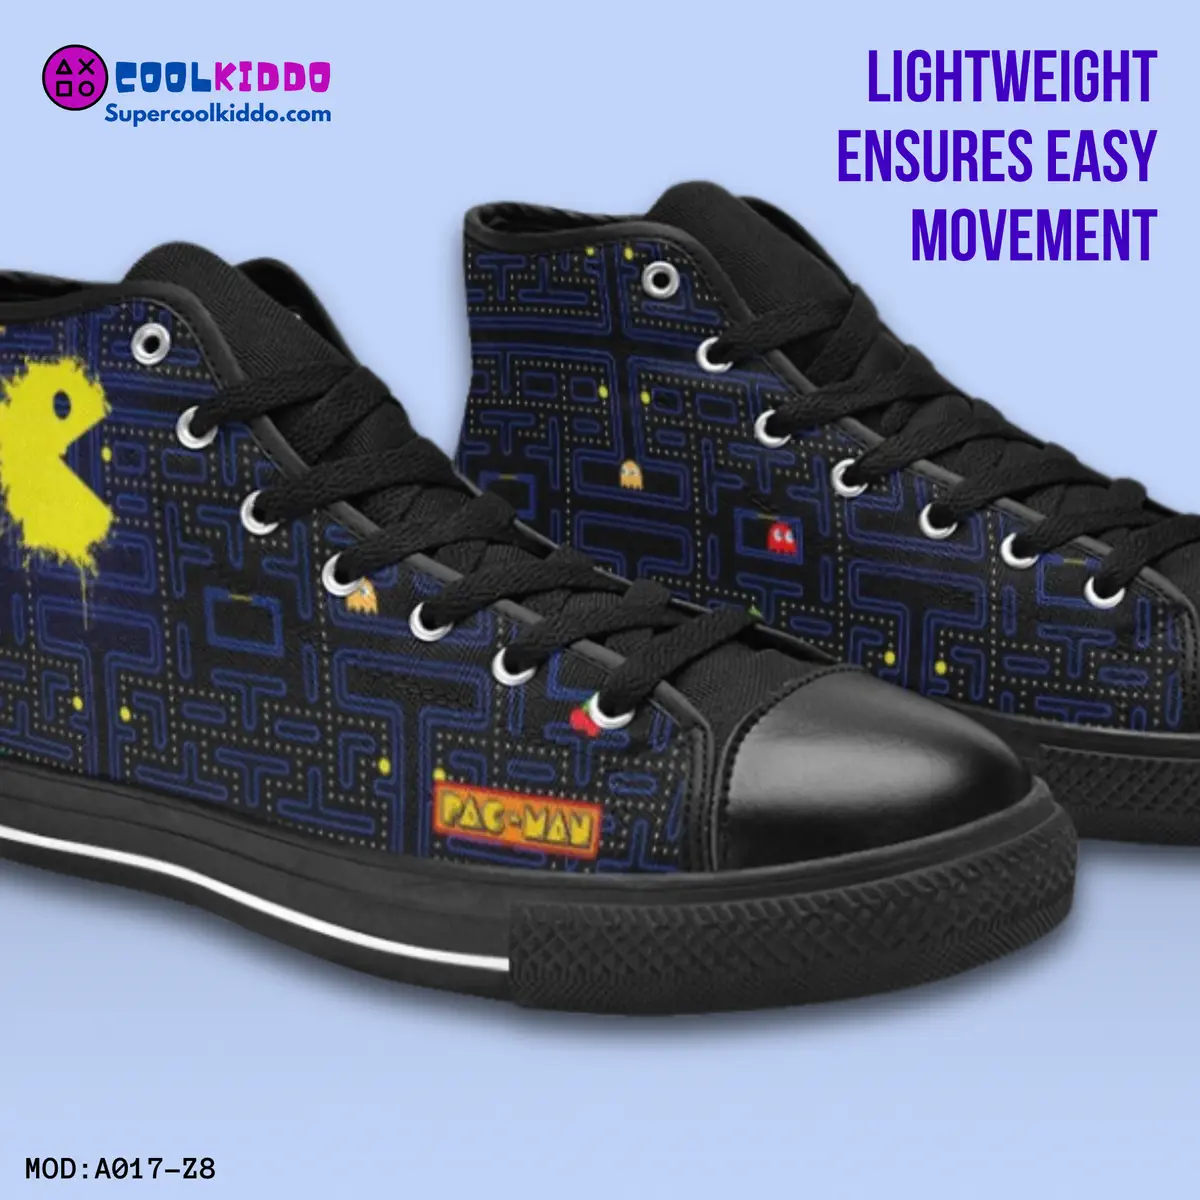 Pac Man Vintage Video Game High Top Sneakers – Custom Canvas Shoes for Kids/Youth Cool Kiddo 24